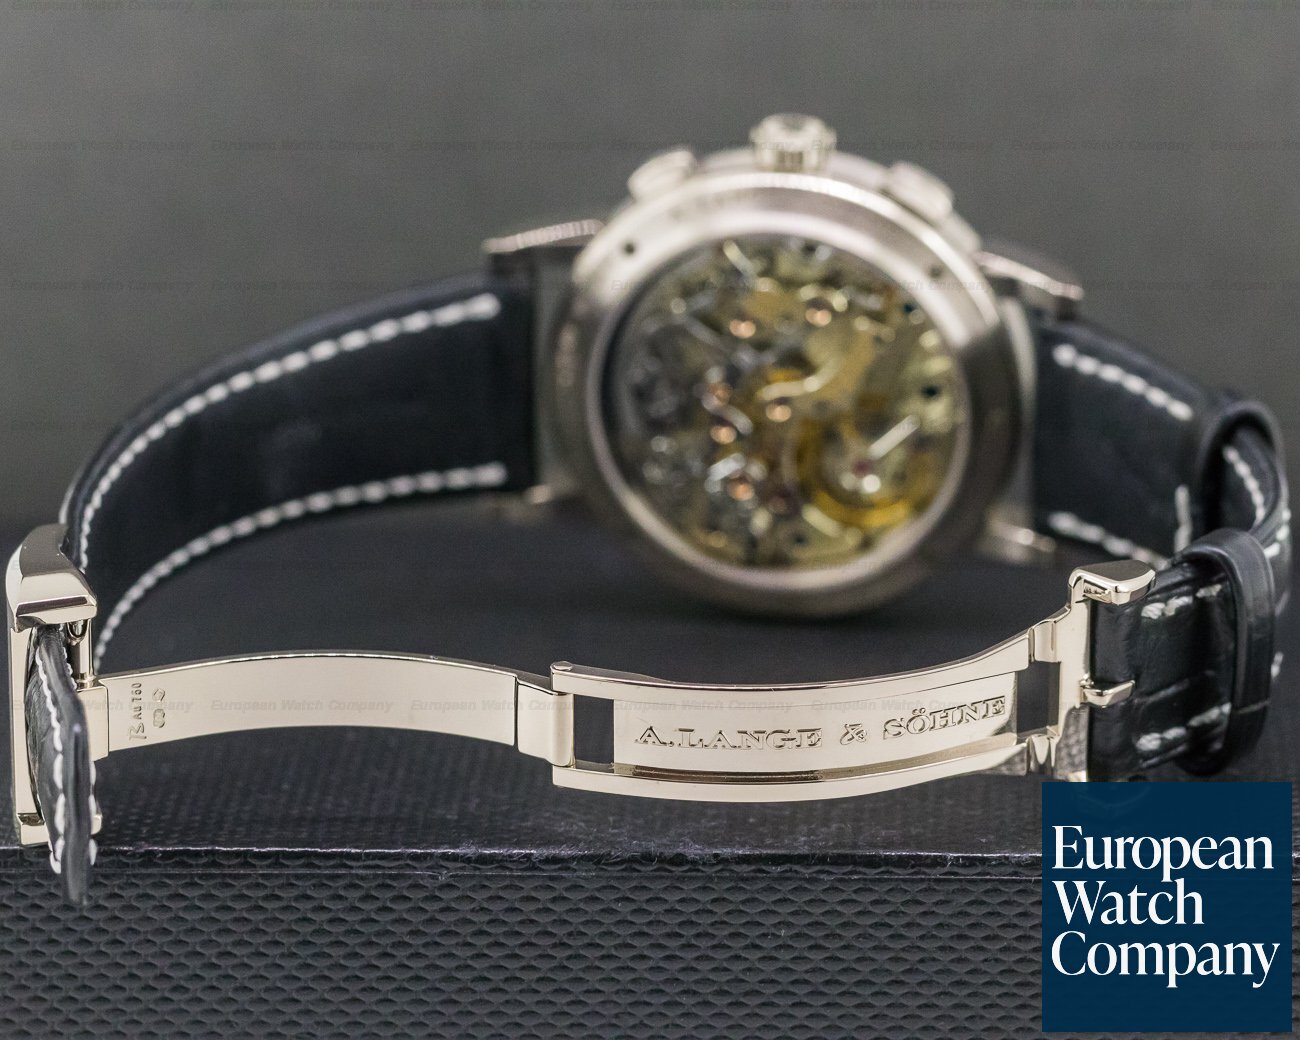 A. Lange and Sohne 1815 Chronograph 18K White Gold DEPLOYANT BUCKLE 2018 Ref. 414.028